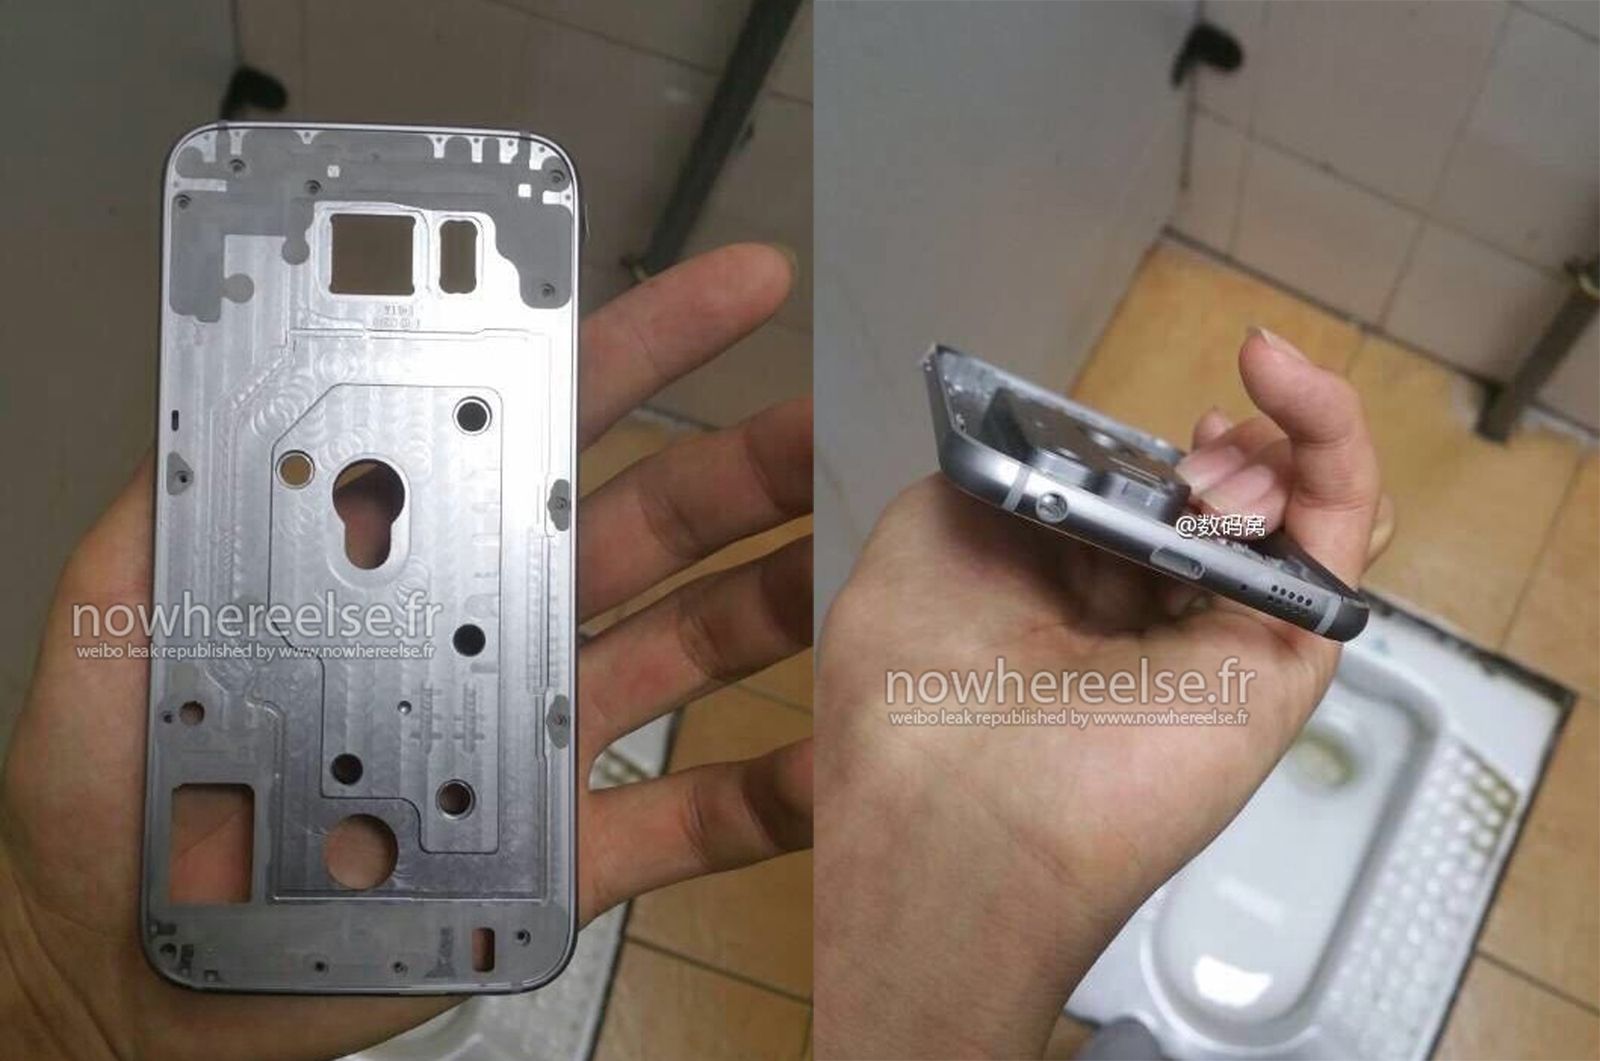 samsung galaxy s6 pictures reveal iphone 6 like design image 1